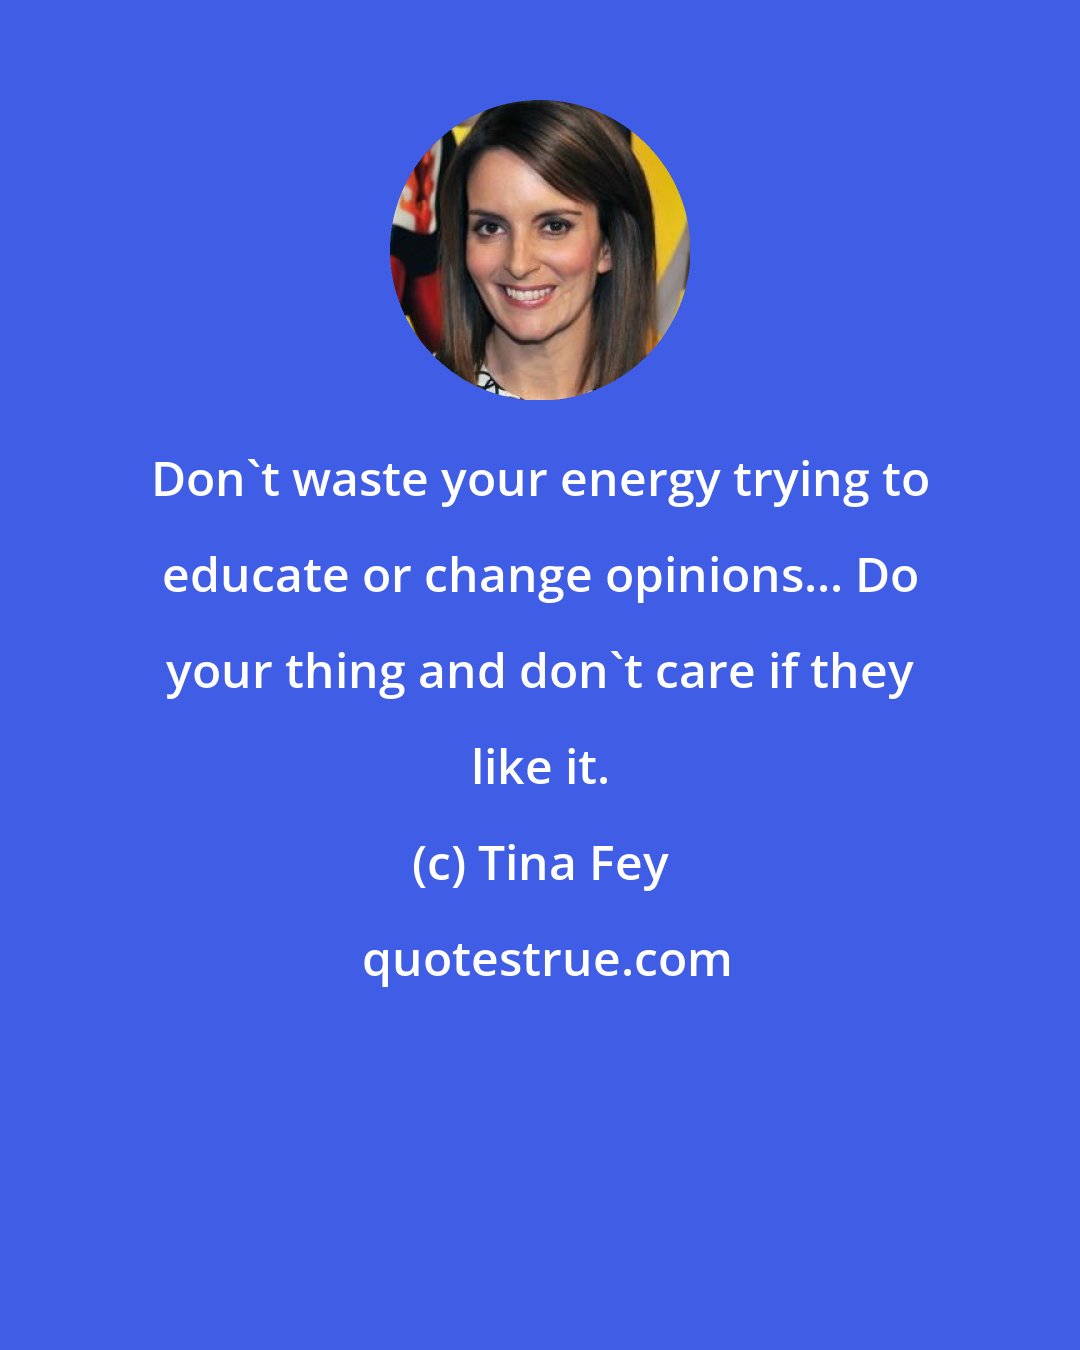 Tina Fey: Don't waste your energy trying to educate or change opinions... Do your thing and don't care if they like it.